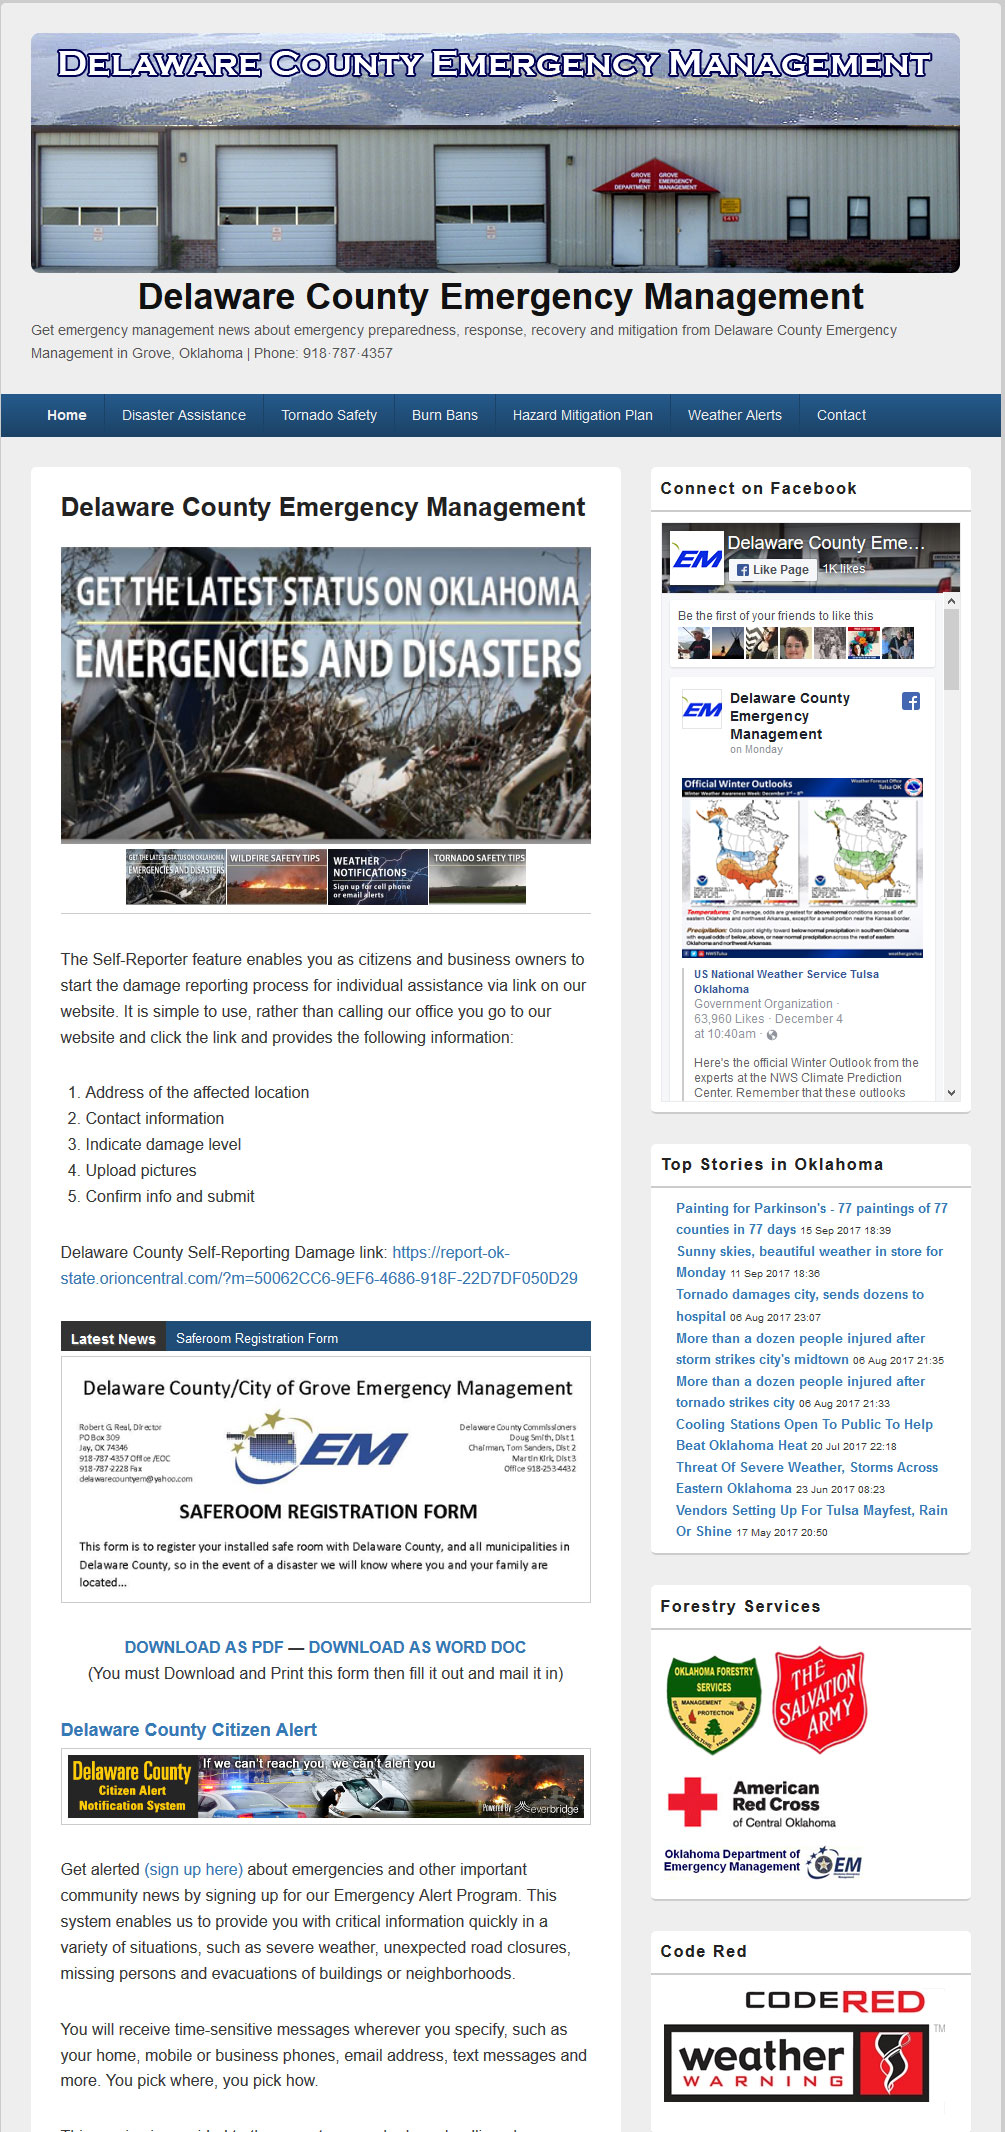 Delaware County Emergency Management